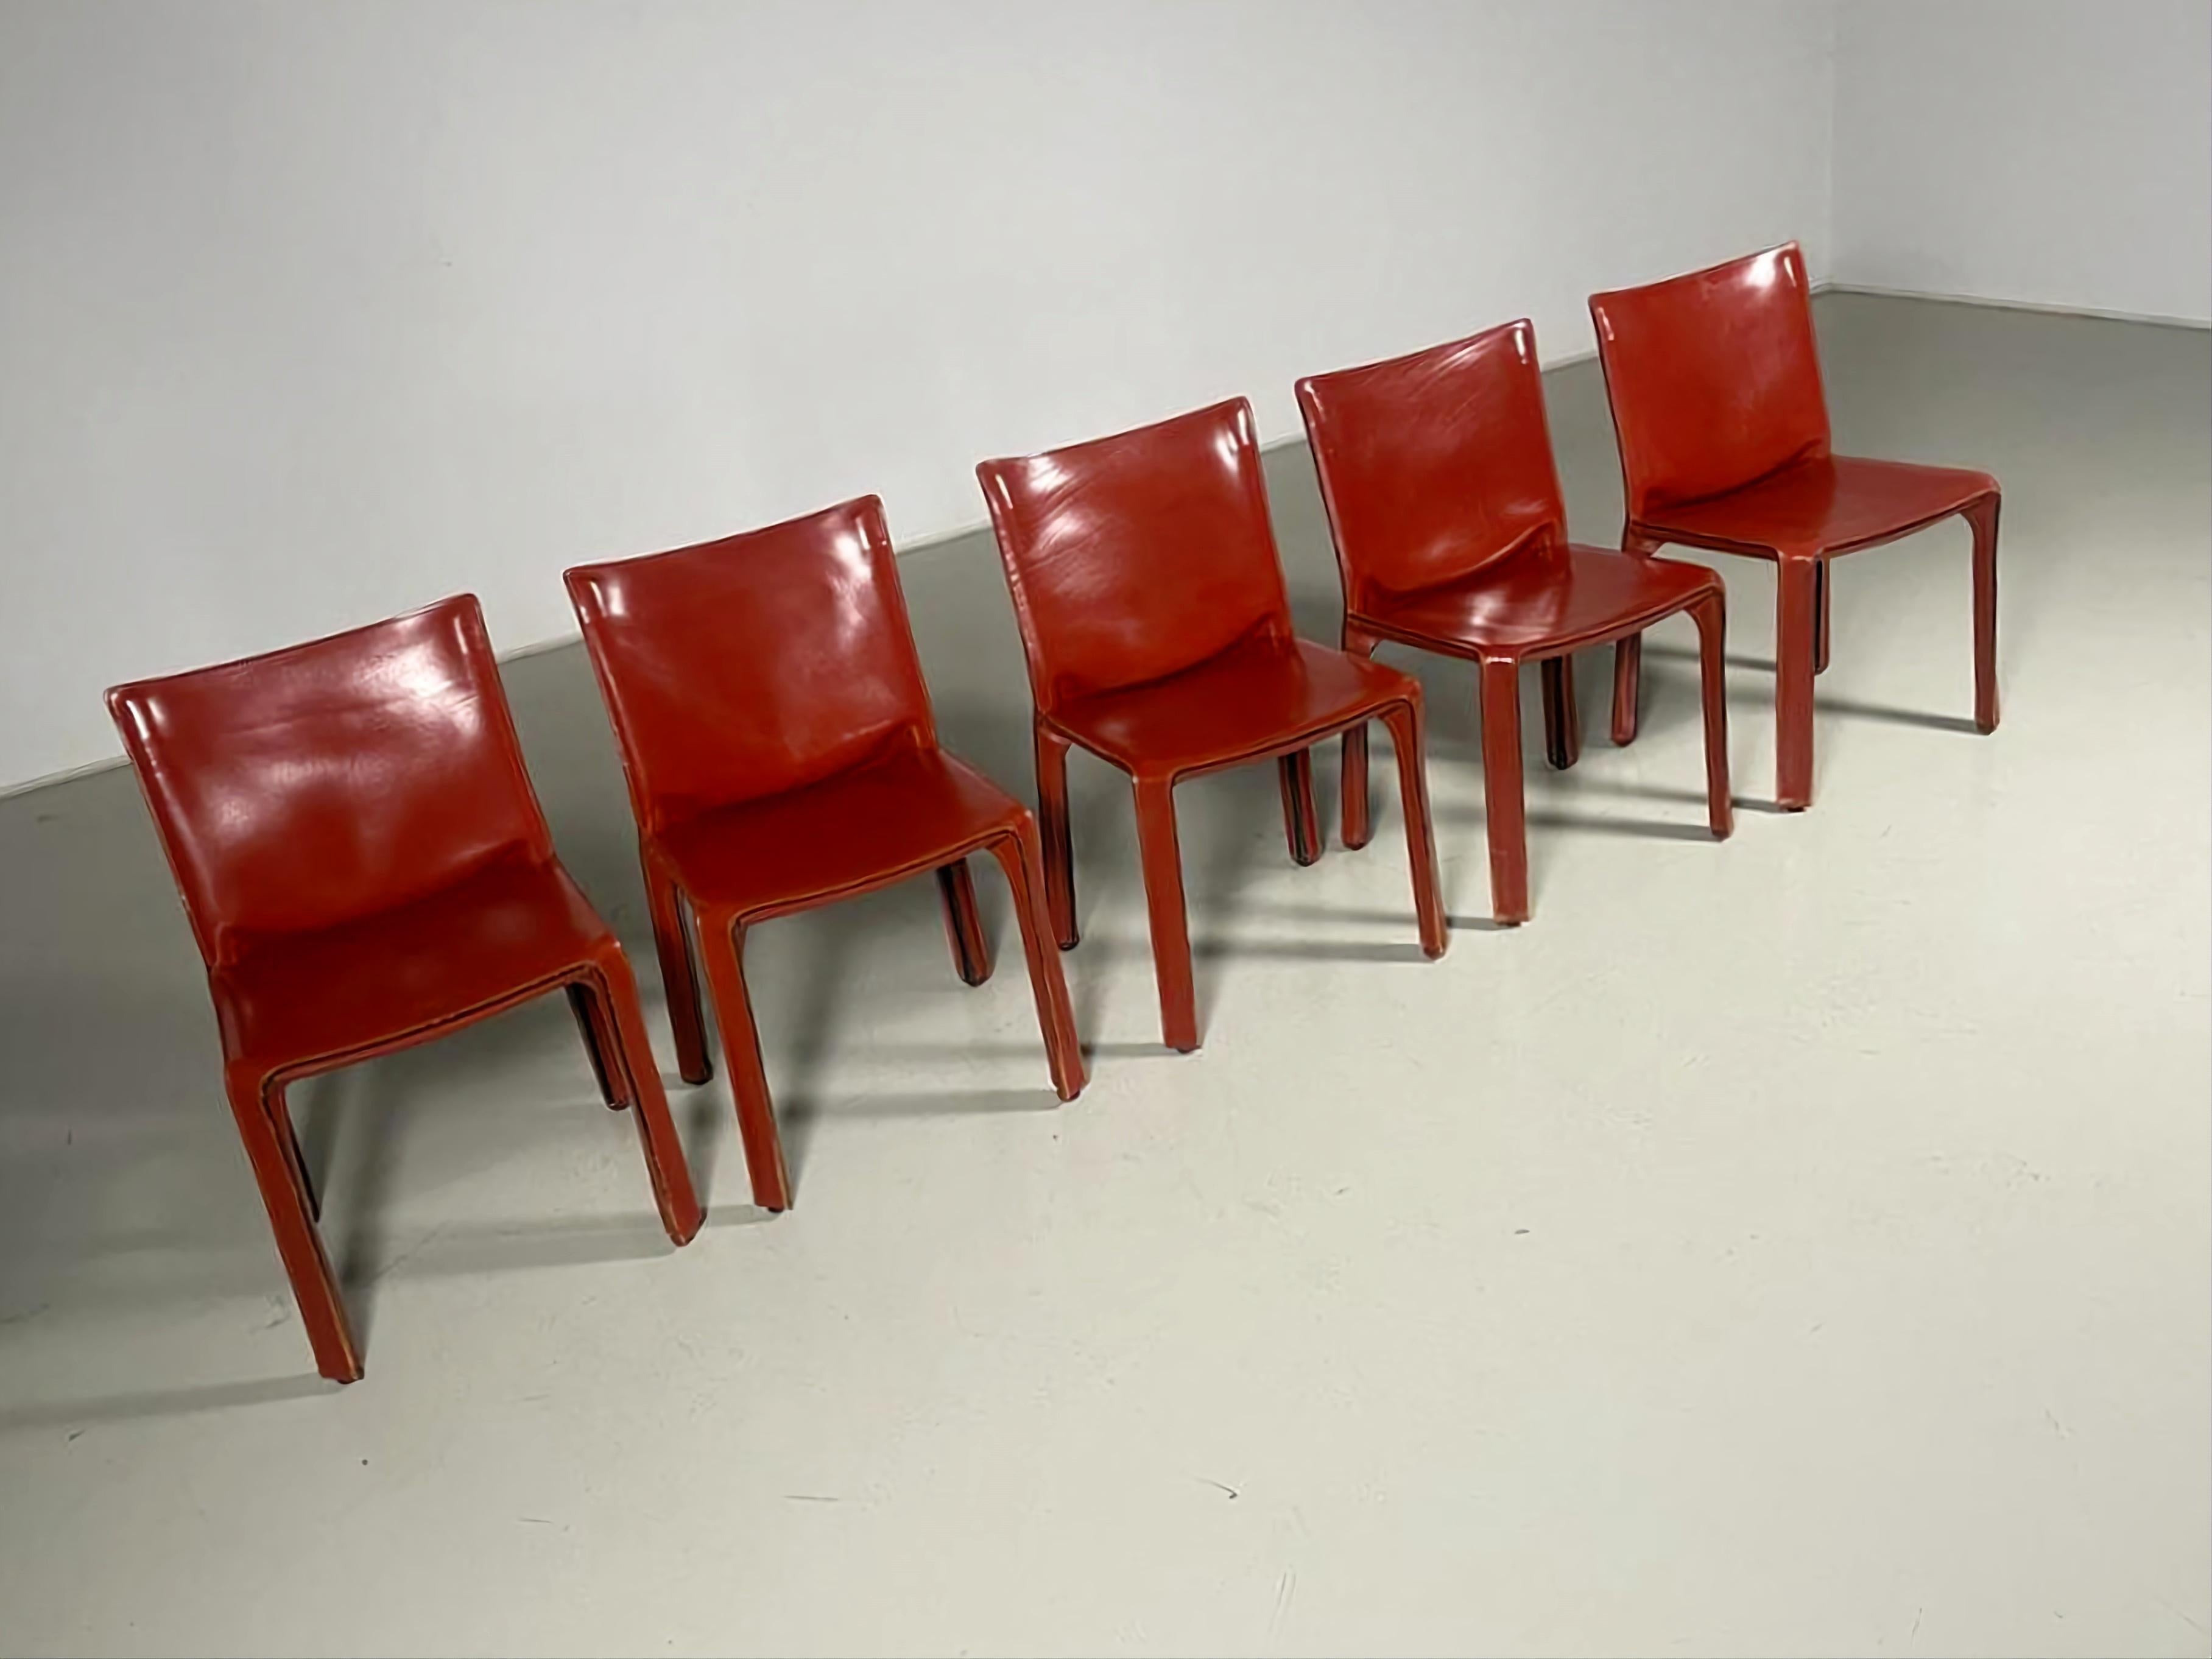 Italian Set of 5 CAB 412 Chairs in Russian Red leather by Mario Bellini for Cassina